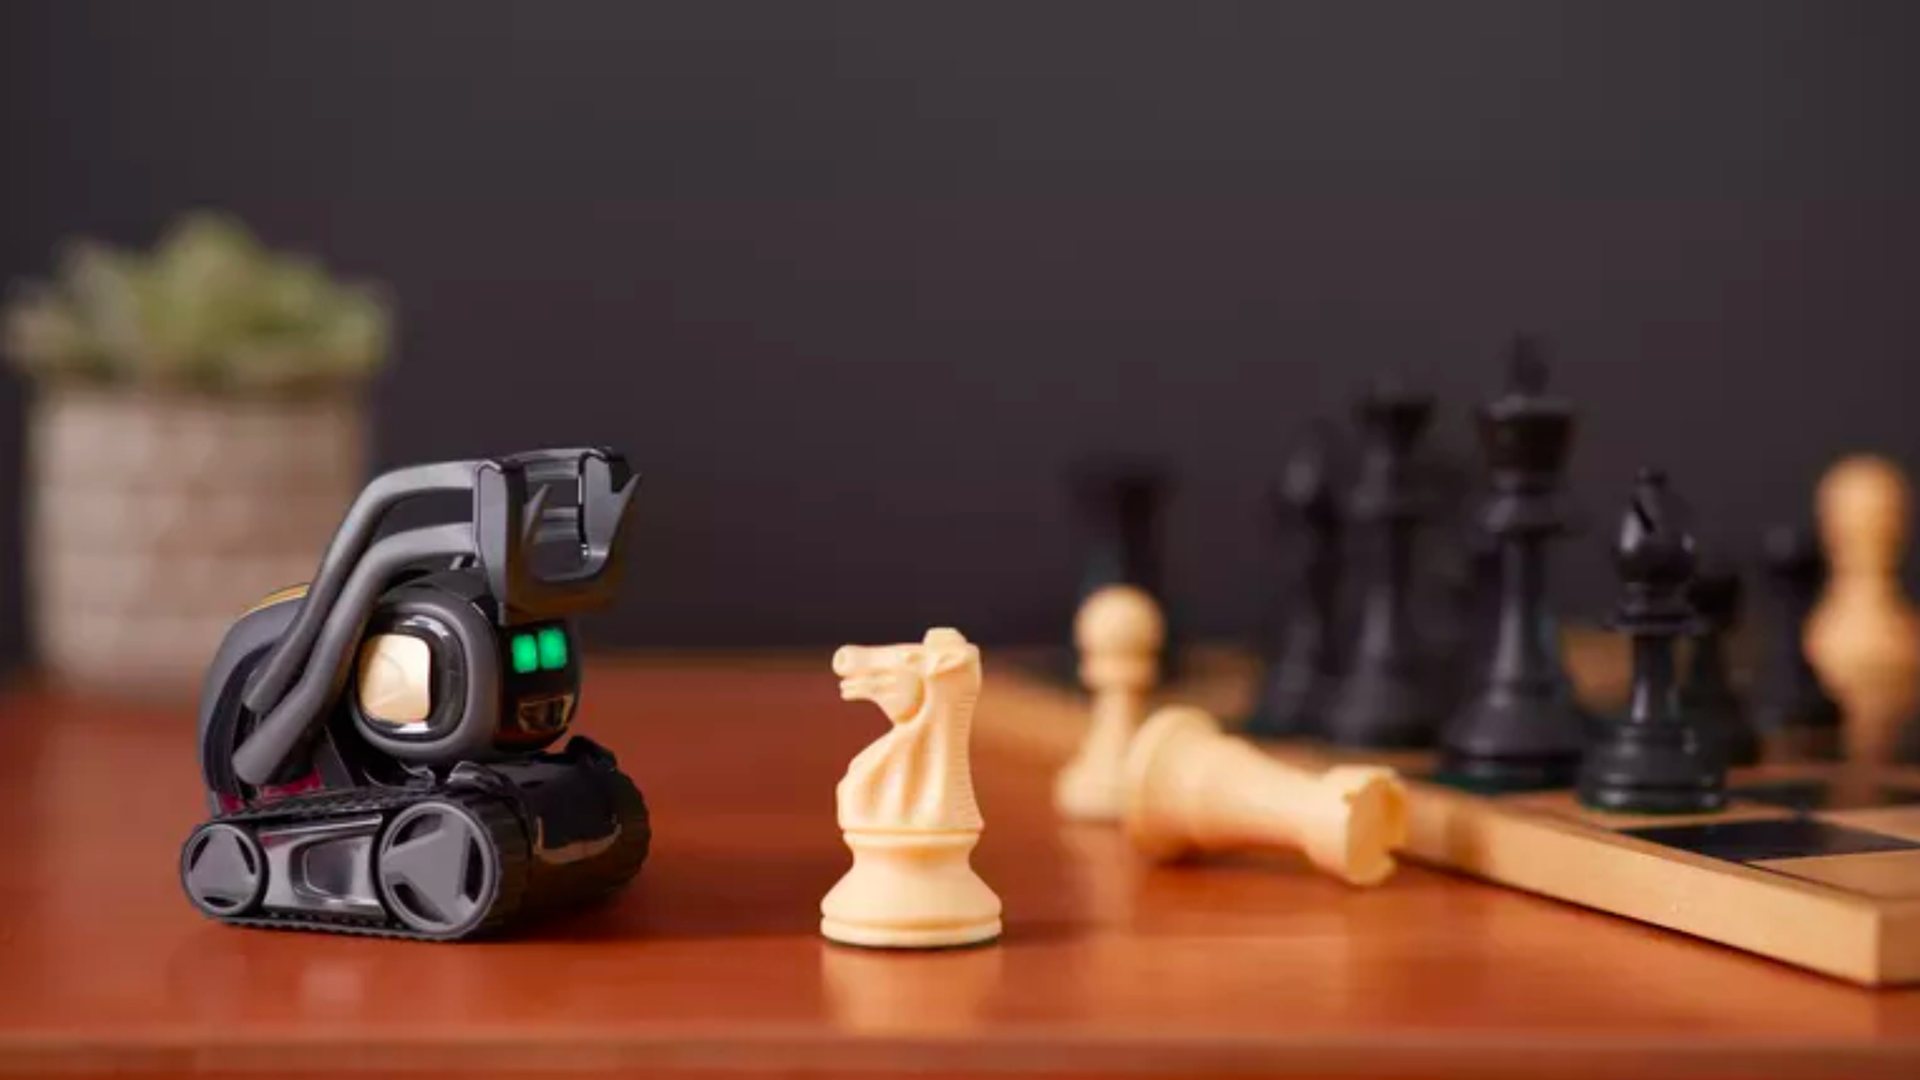 In this image, an Anki robot faces a chess board and a rook stands in front of it.